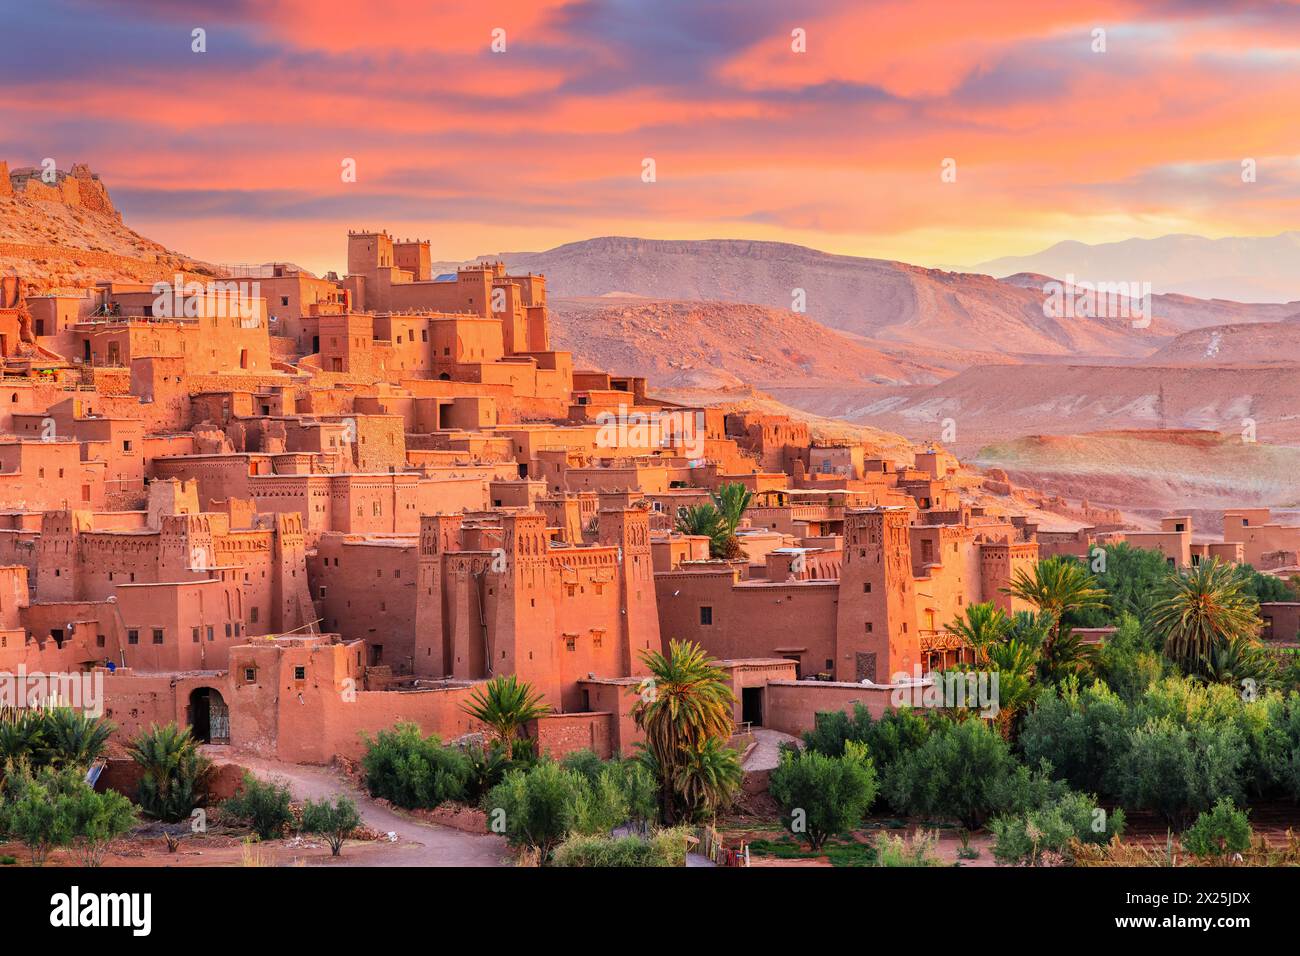 Ait-Ben-Haddou, Ksar or  fortified village in Ouarzazate province, Morocco. Prime example of southern Morocco architecture. Stock Photo